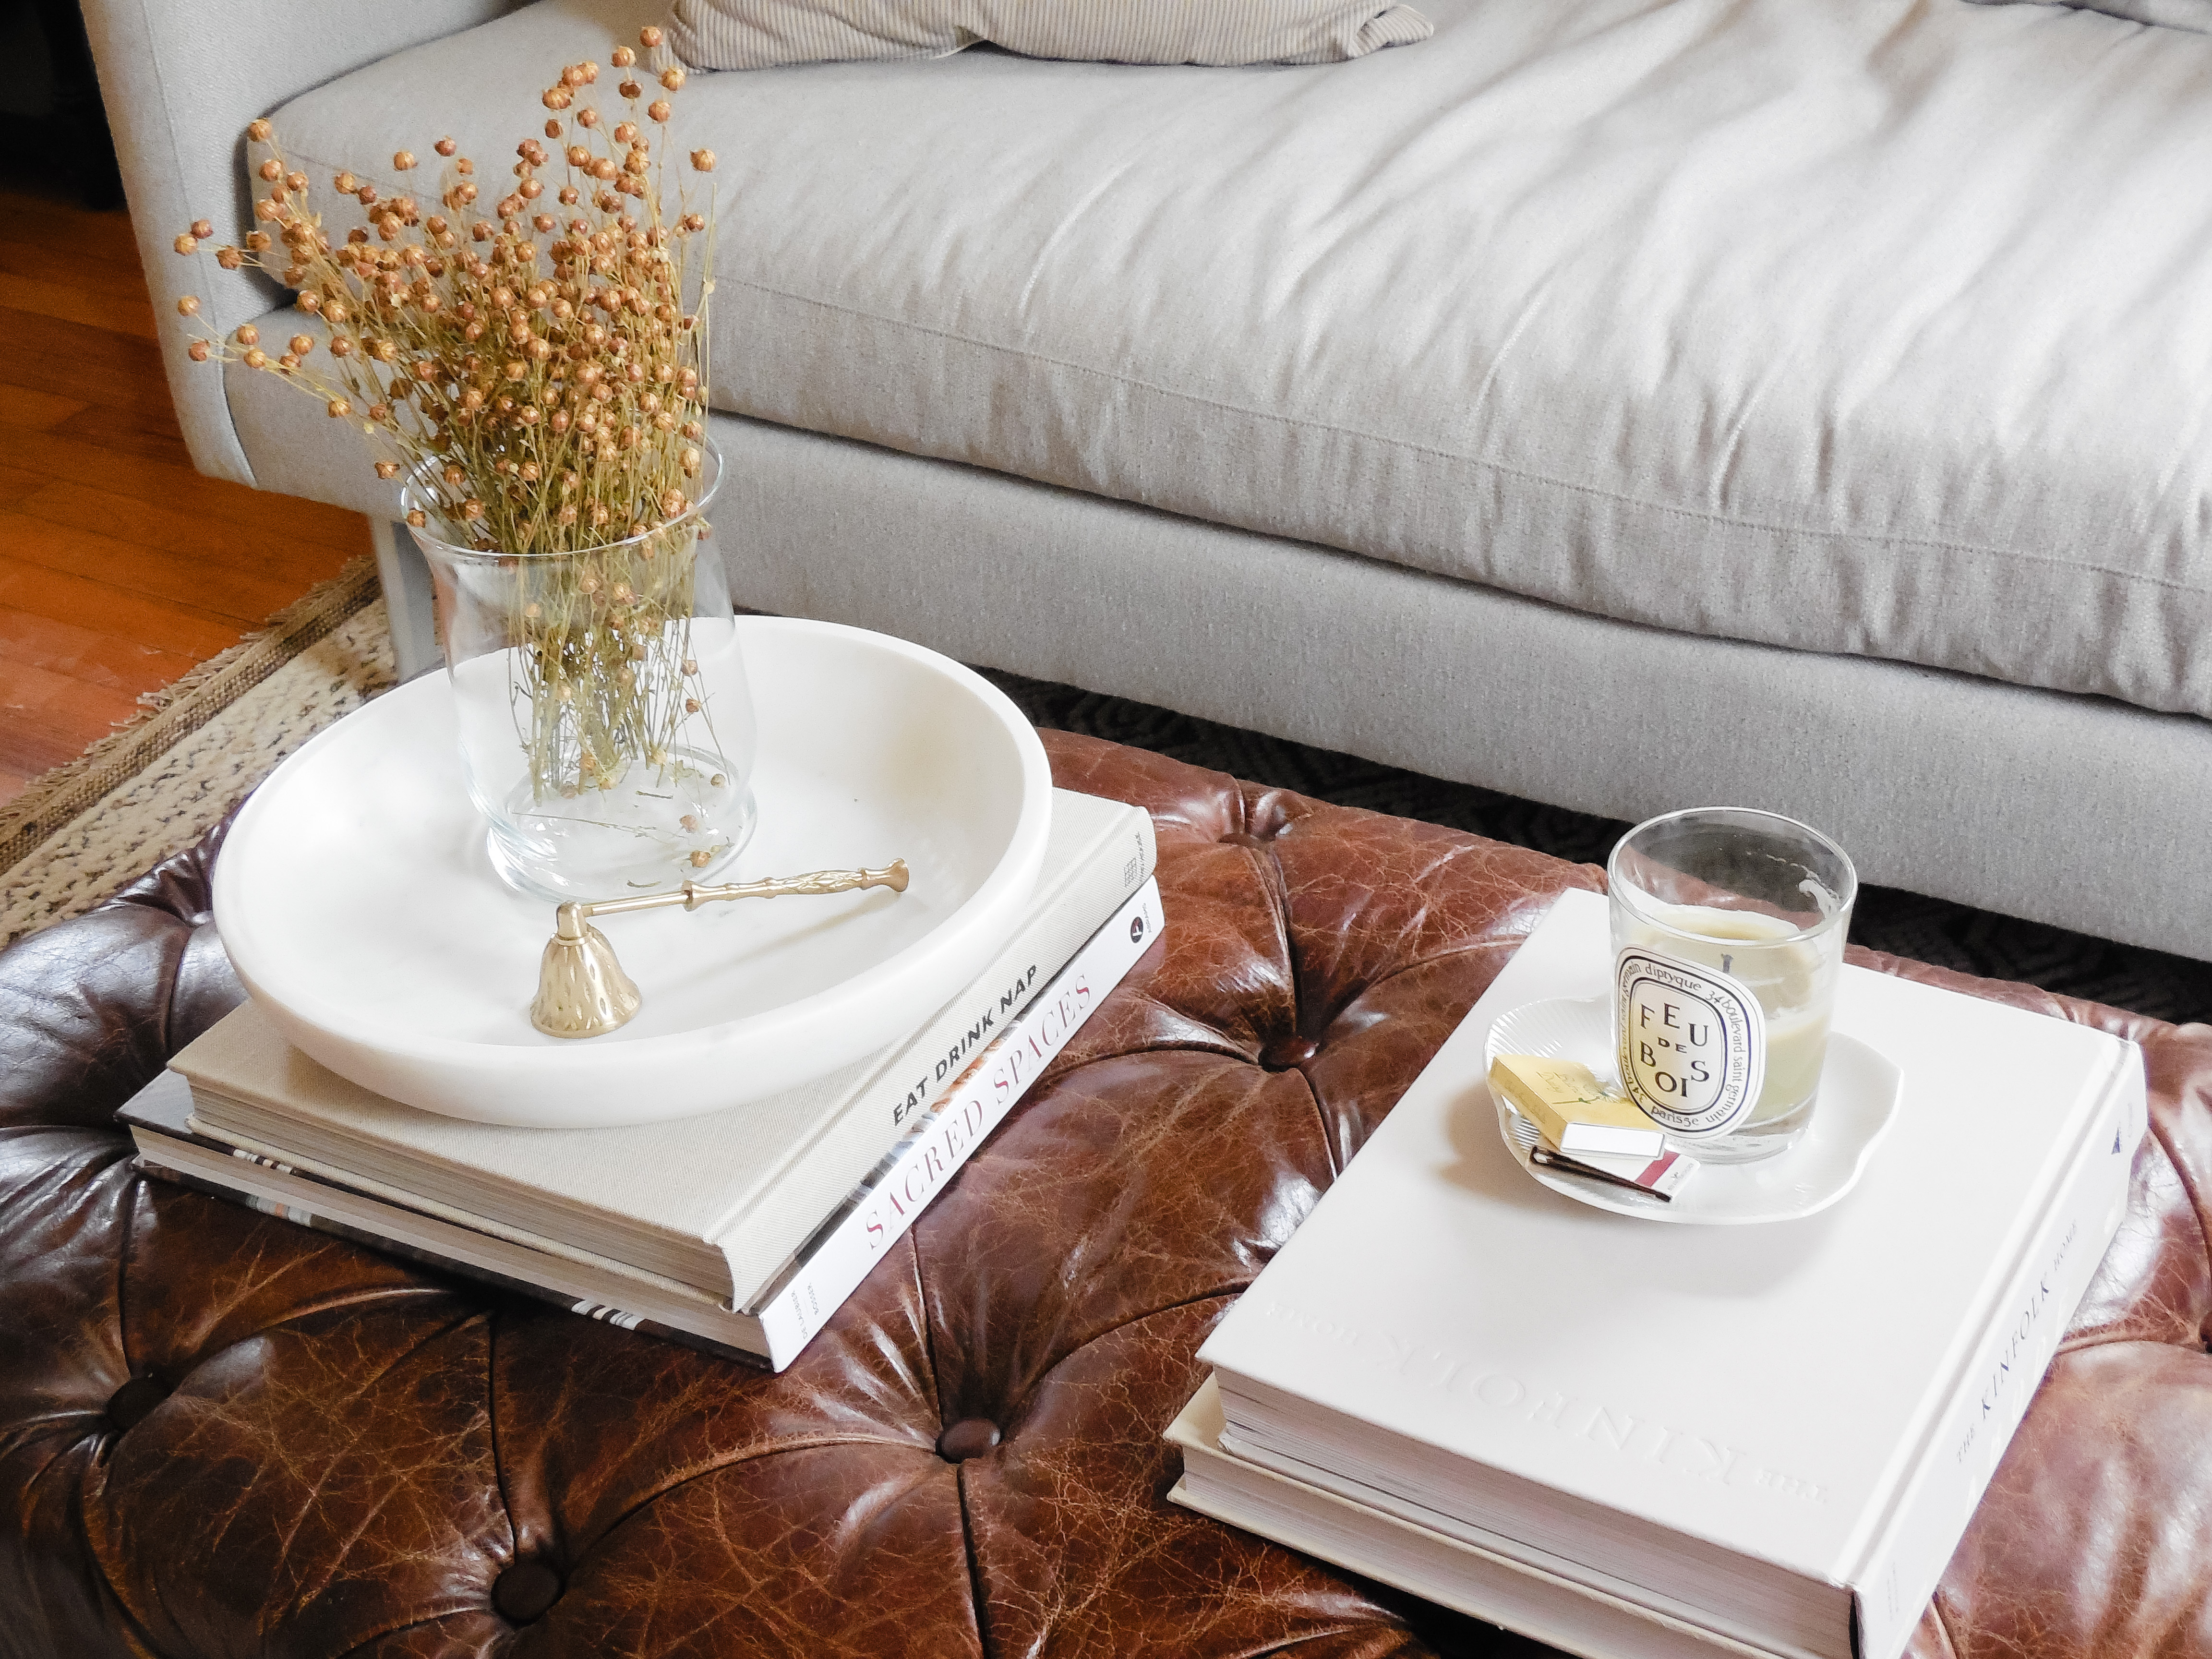 Where to Style with Coffee Table Books